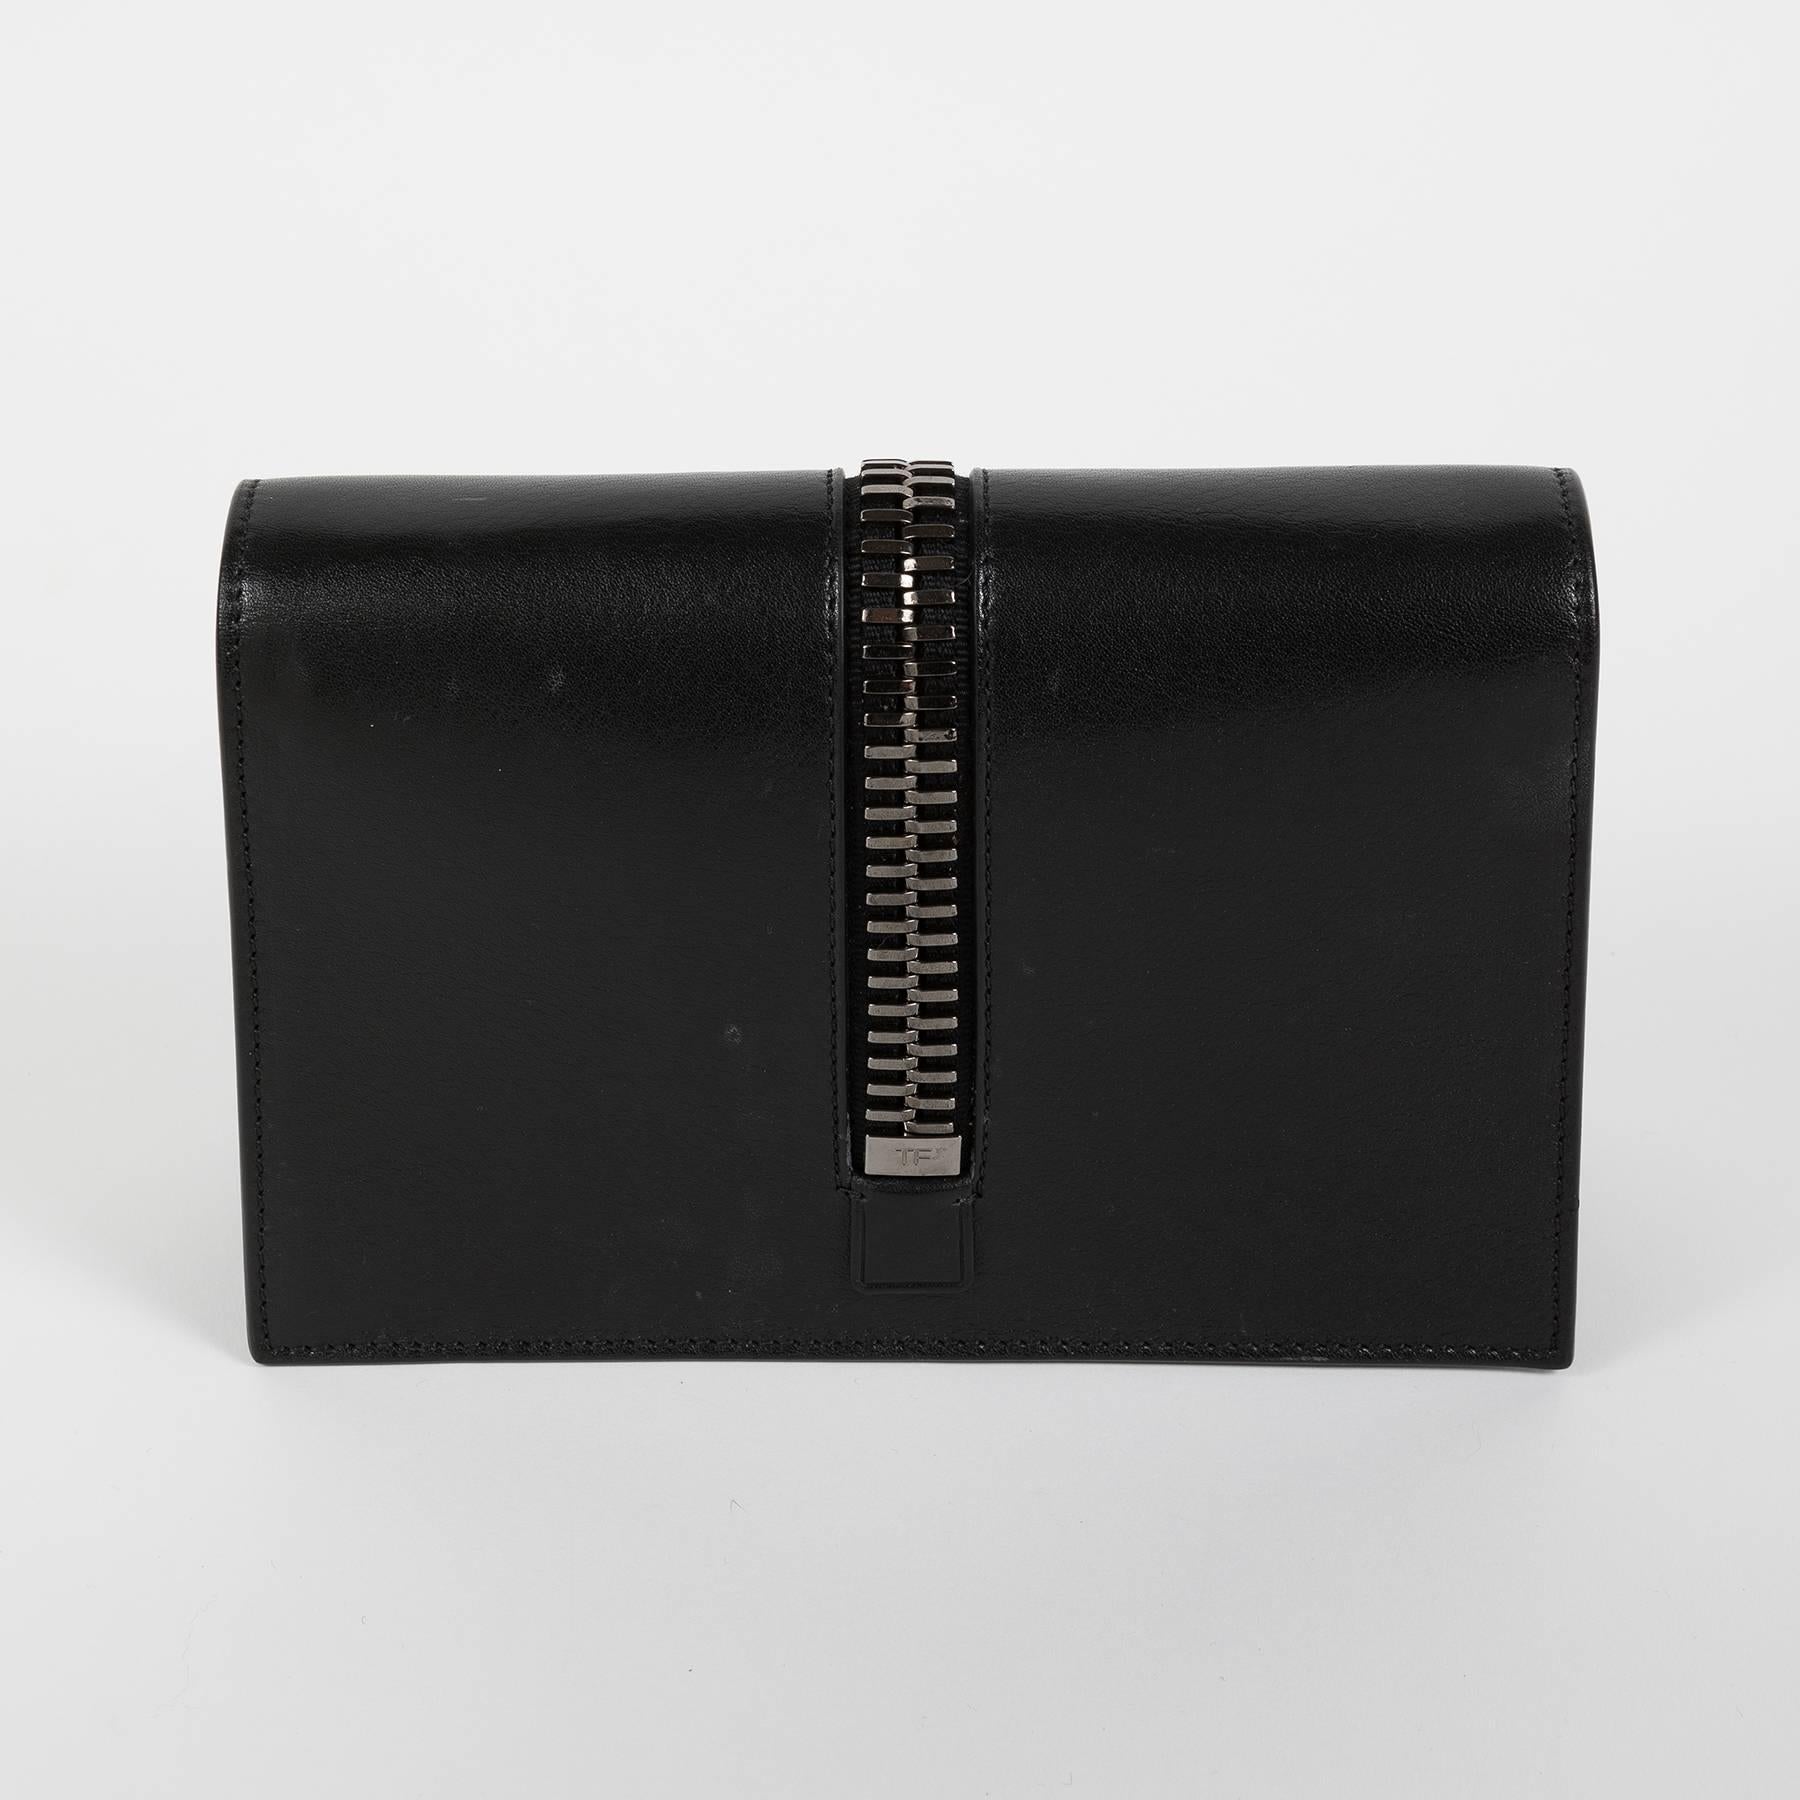 Tom Ford shoulder flap bag in black leather with a big decorative zipper on the flap.
The strap is removable.
The bag comes with its dustbag and  original tag.
